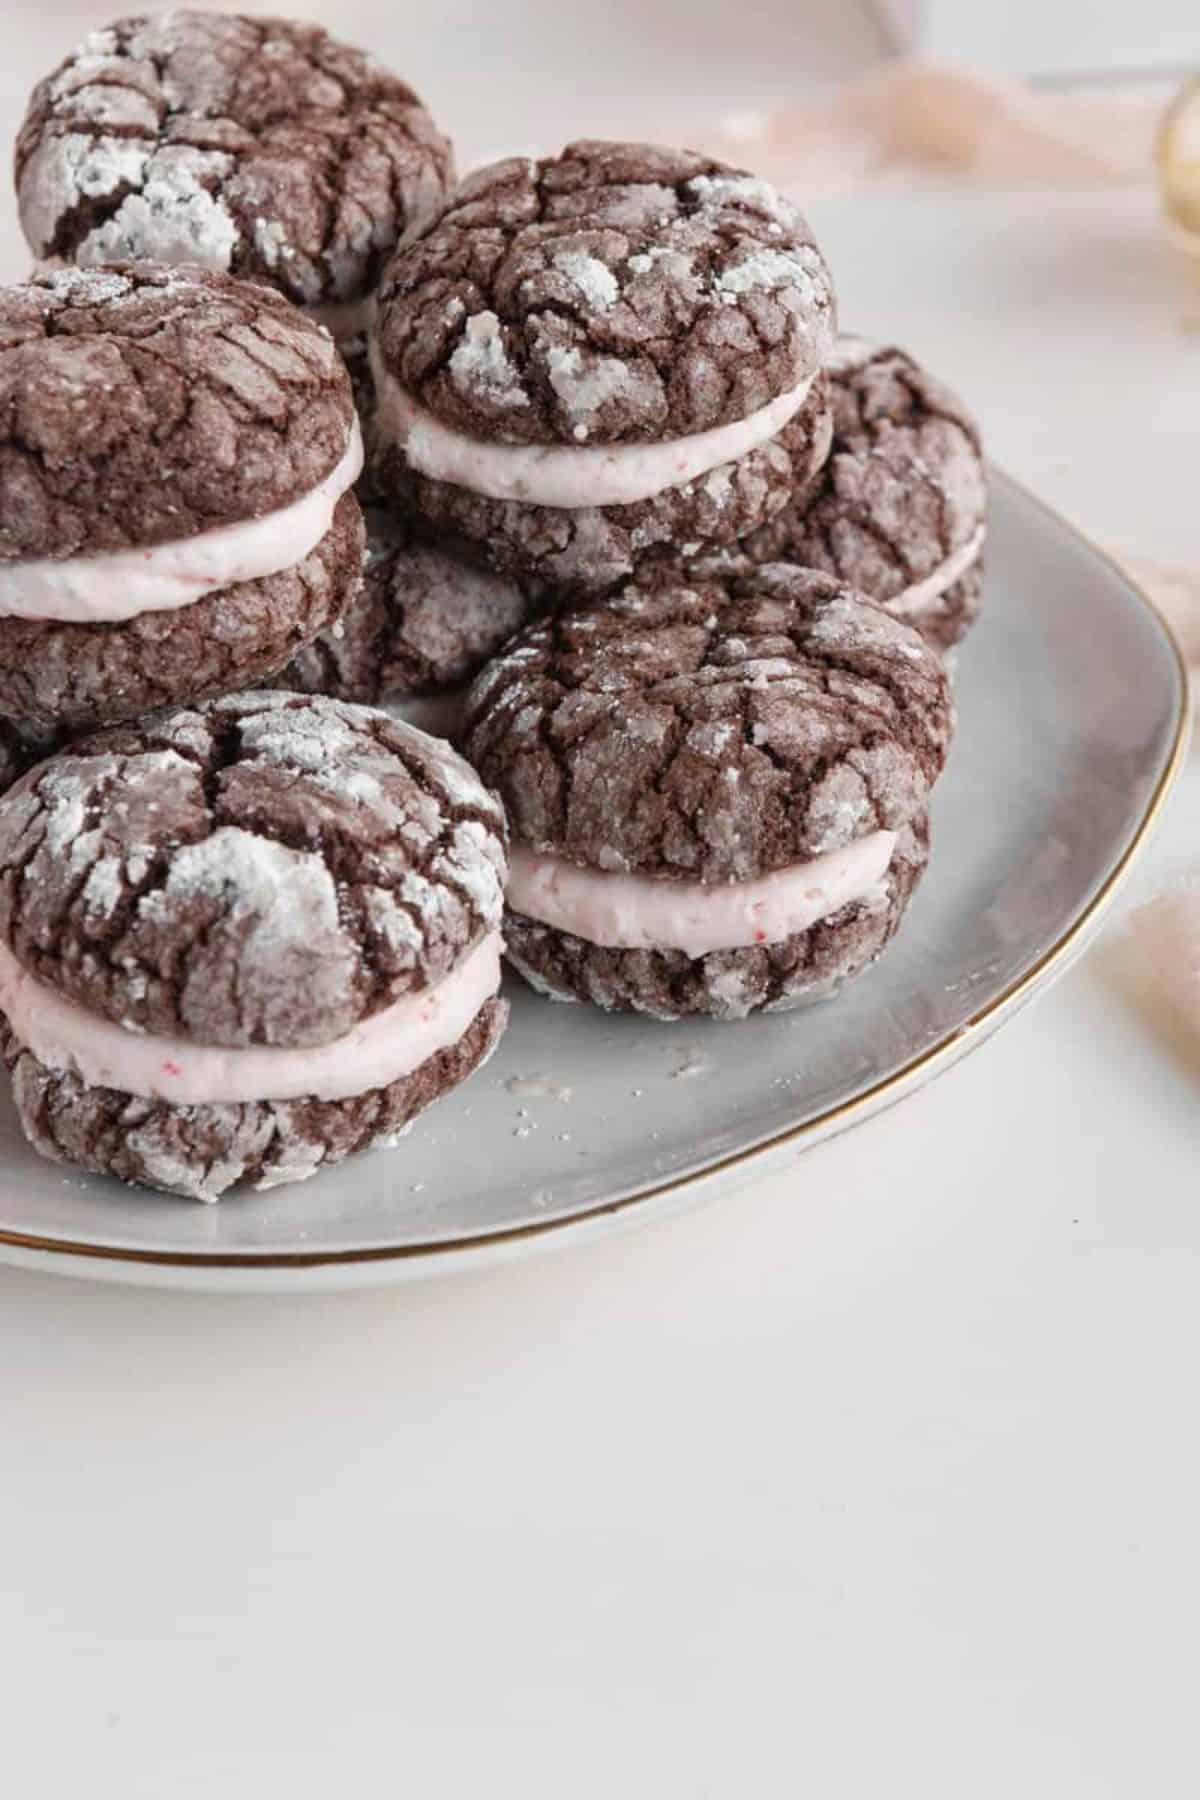 Chocolate crinkle cookies with peppermint buttercream filling on plate